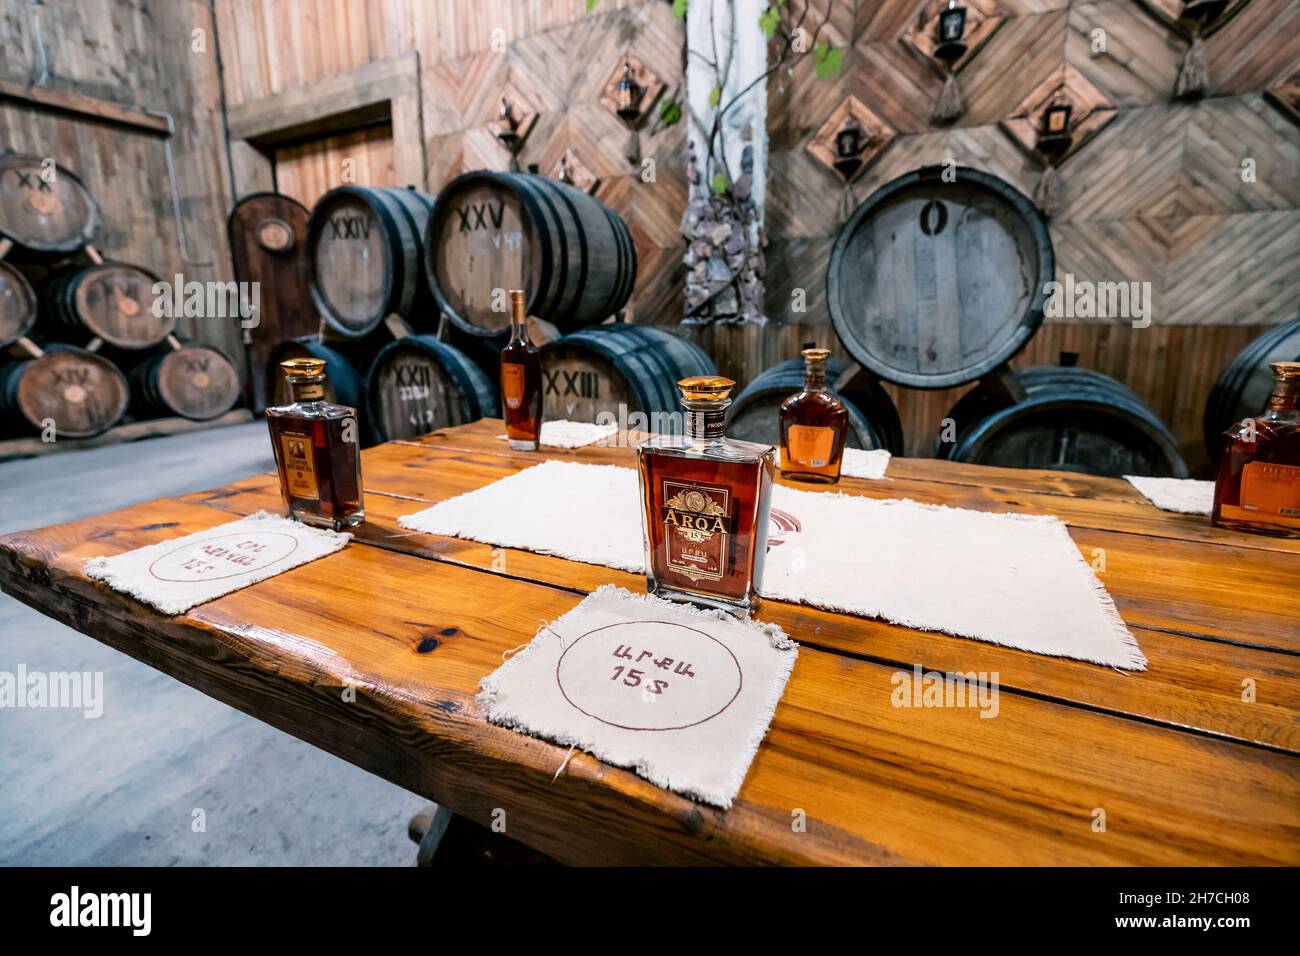 21 May 2021, Ijevan, Armenia: Tasting of the famous Armenian cognac at the Ijevan factory of various years and blends in the basement with wooden barr Stock Photo